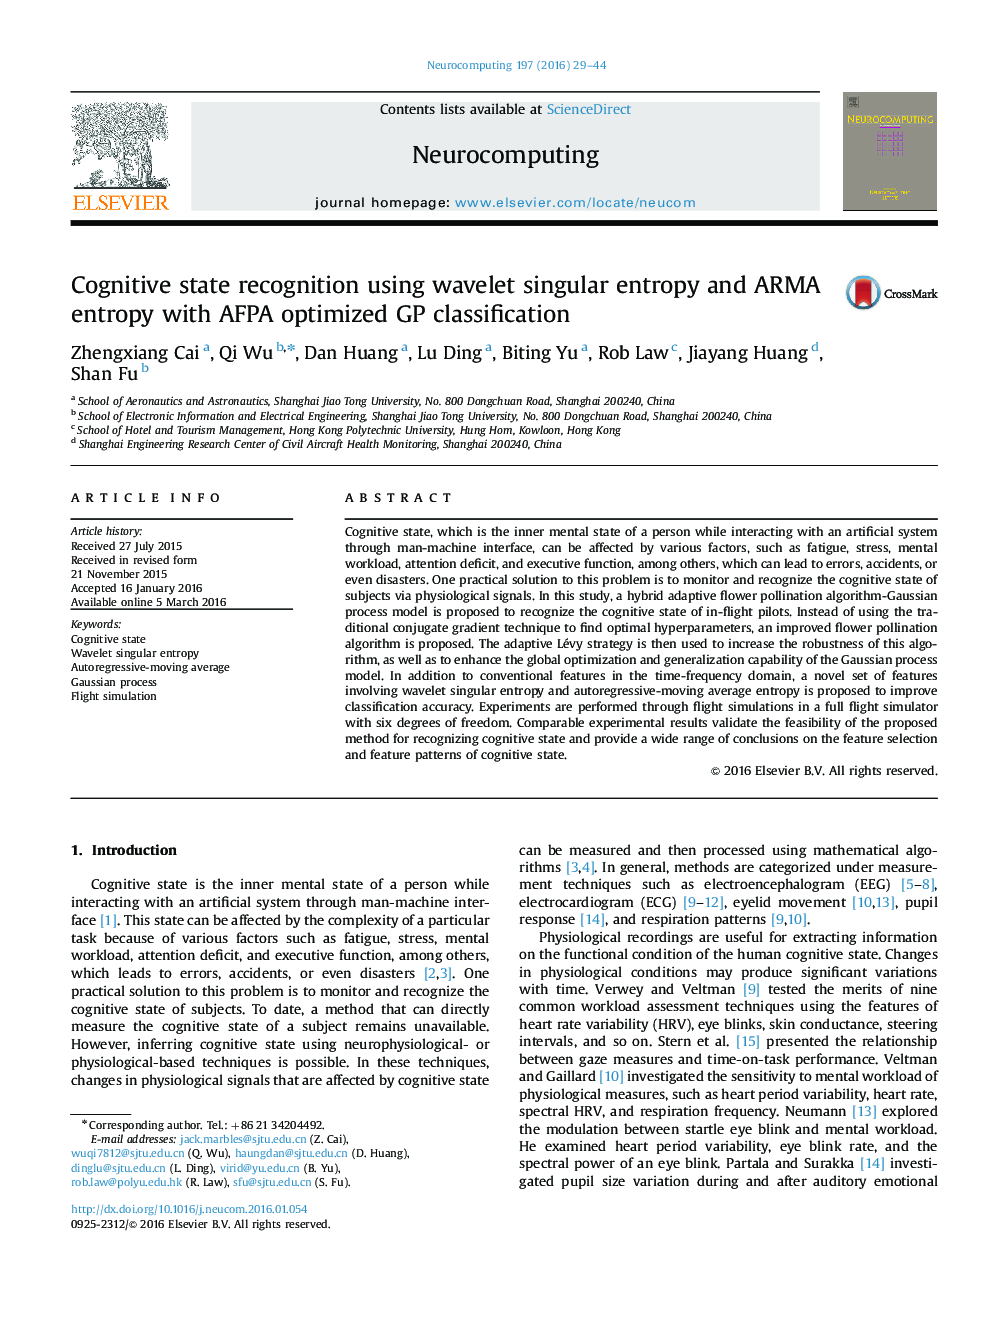 Cognitive state recognition using wavelet singular entropy and ARMA entropy with AFPA optimized GP classification